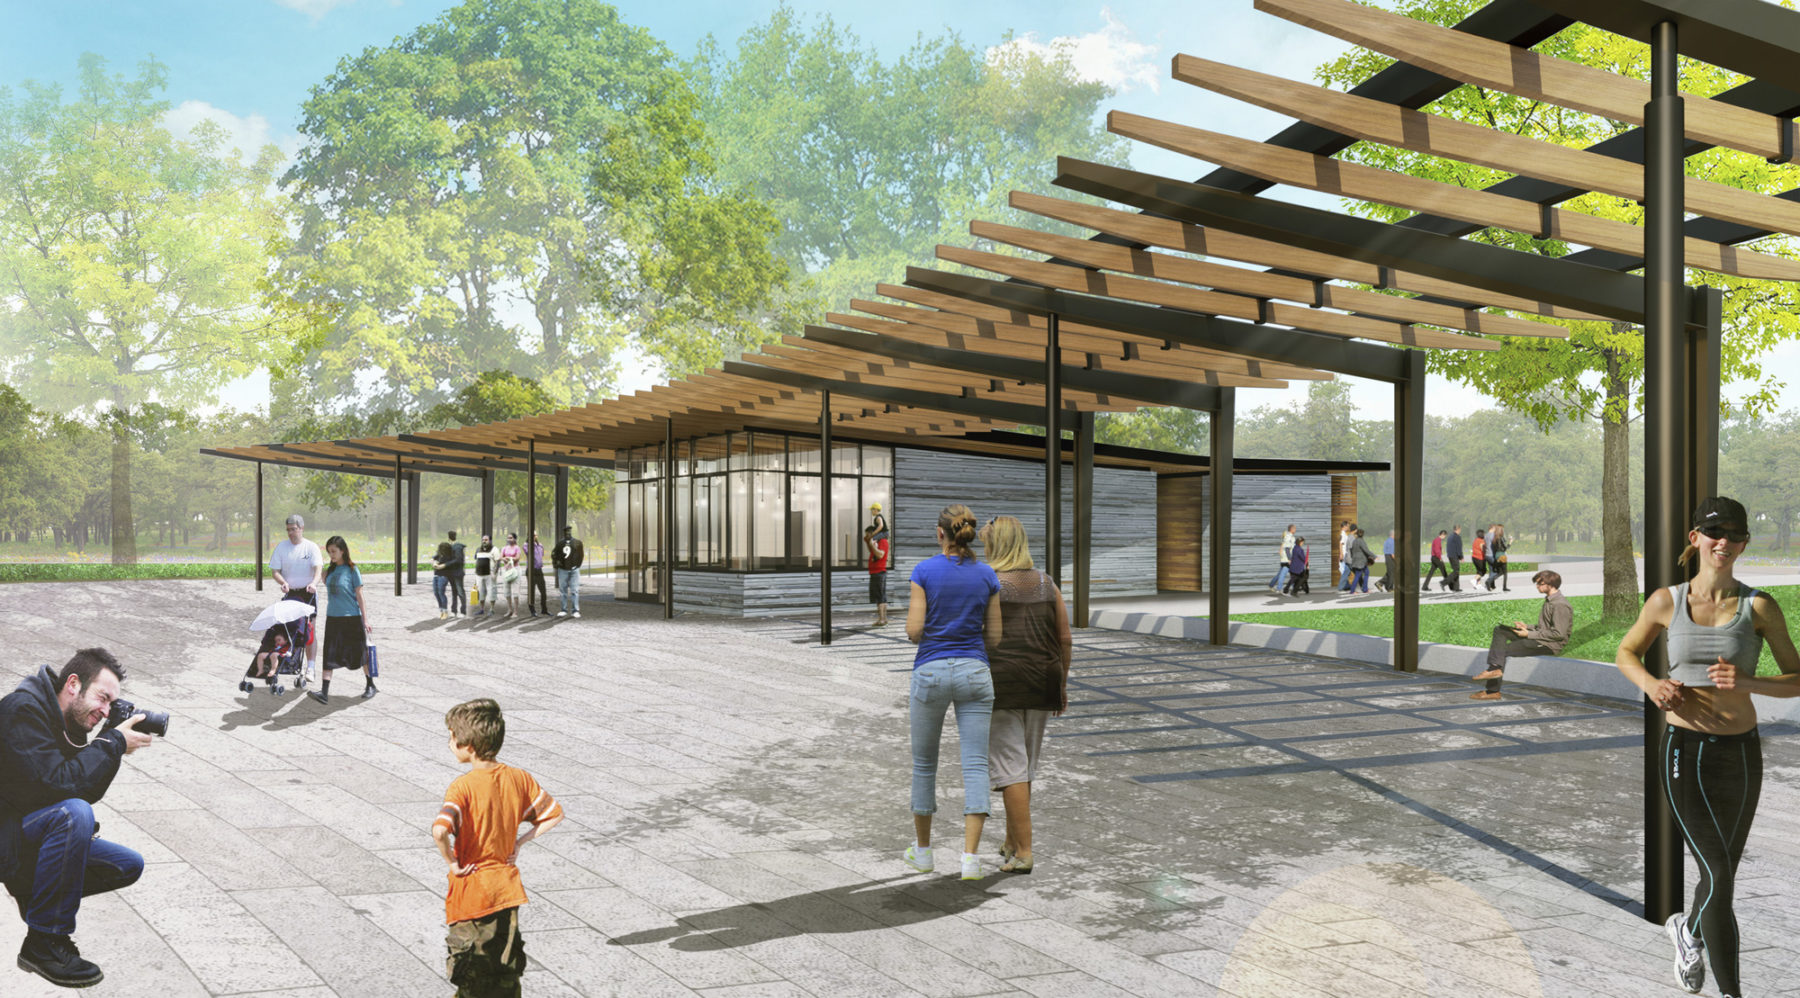 Rendering of people walking along the plaza under the trellis